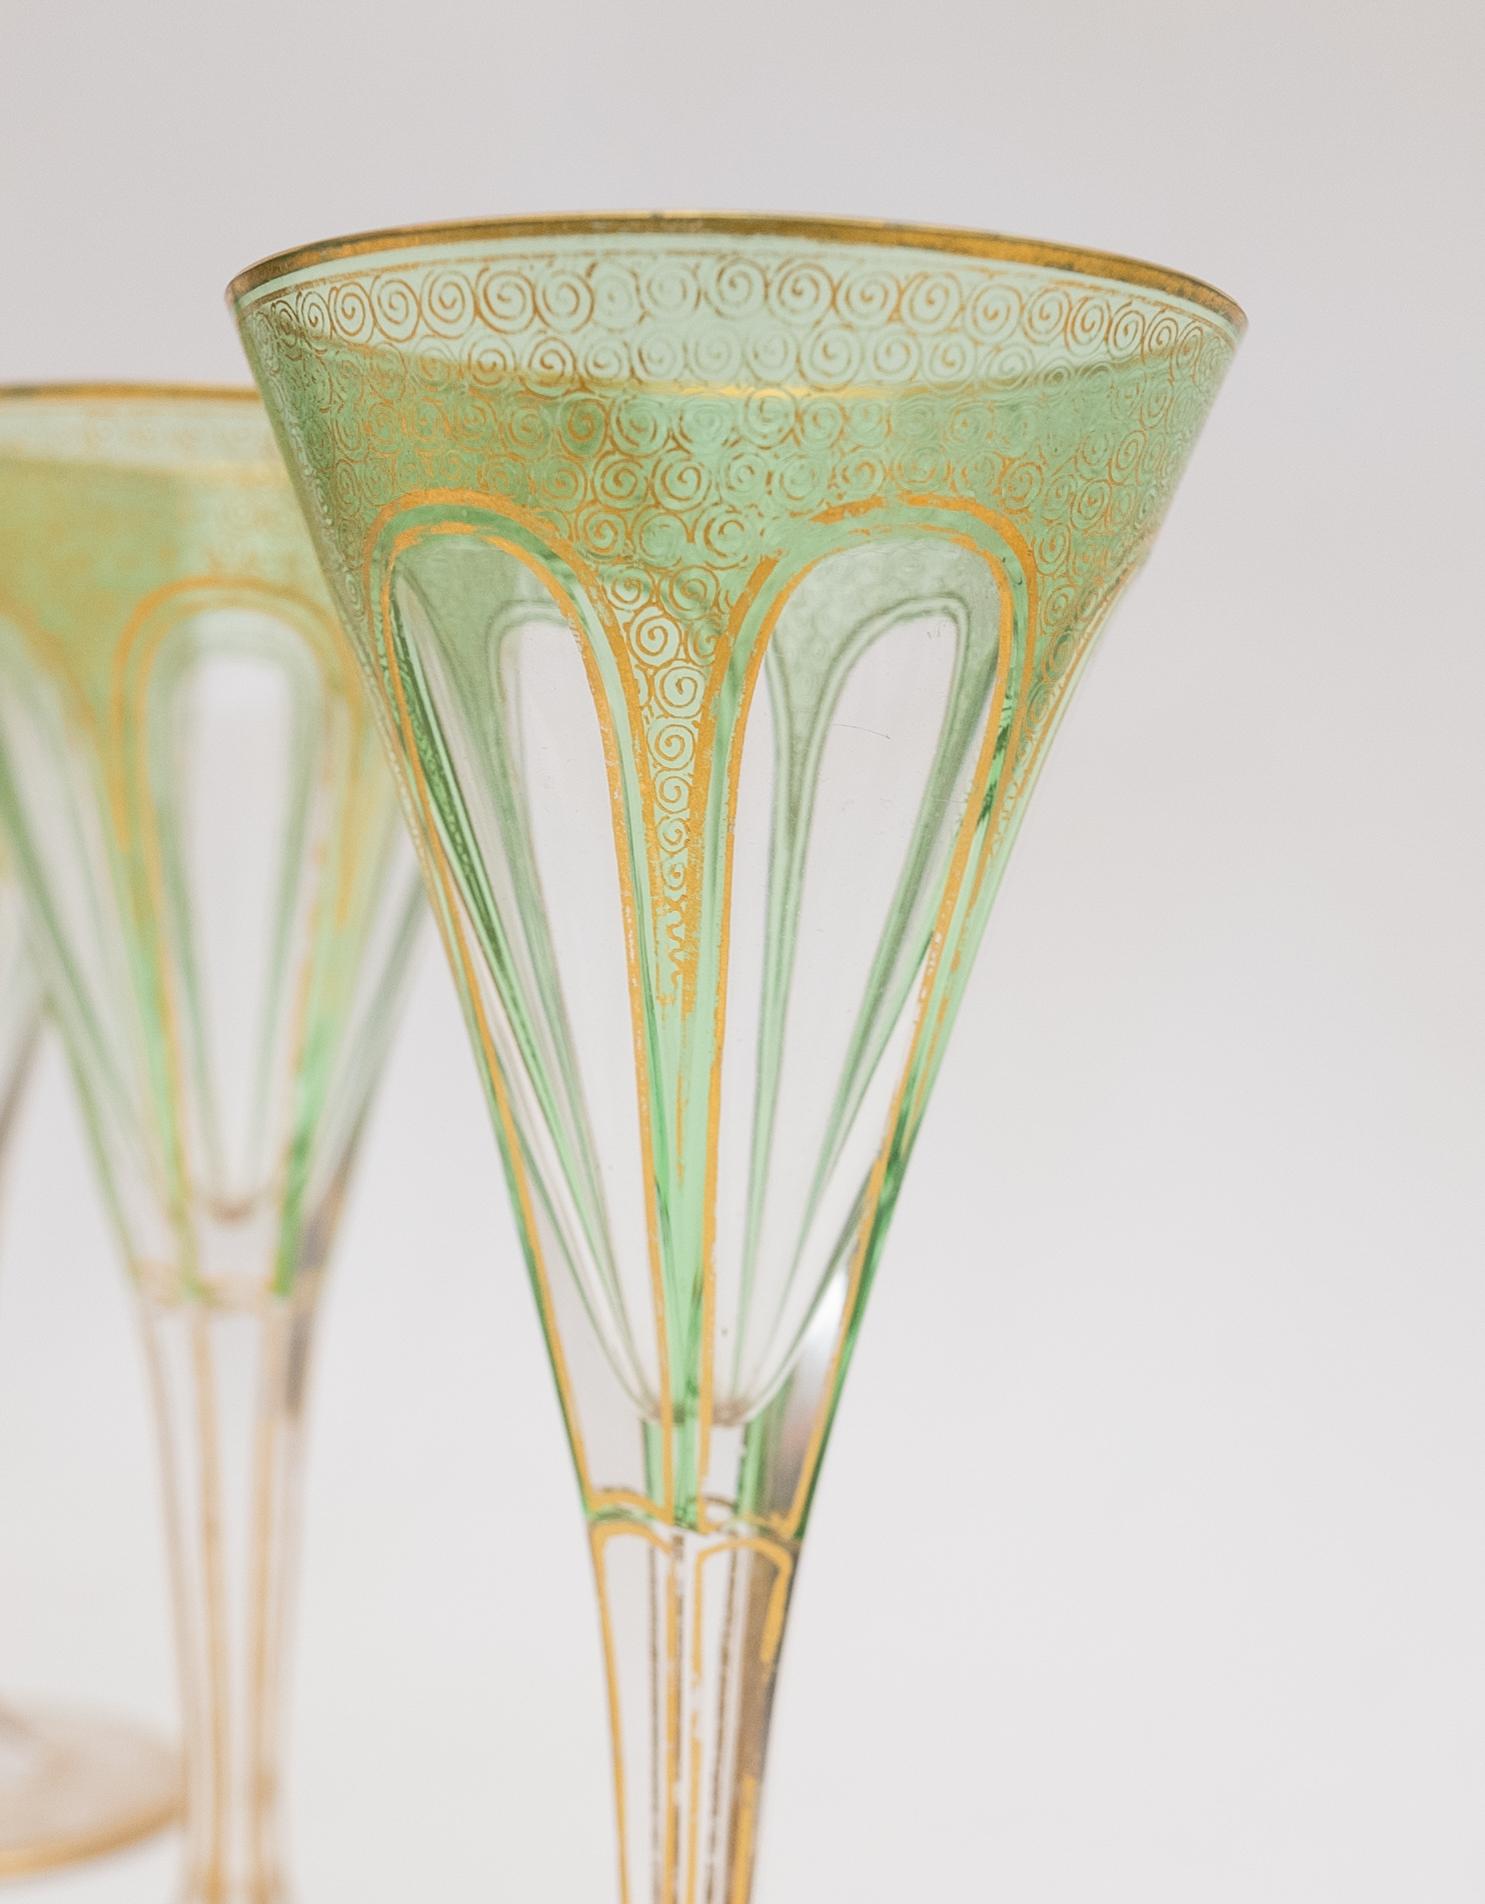 Late 19th Century Set of 4 Antique Moser Green & Gilt Crystal Champagne or Cocktail Glasses